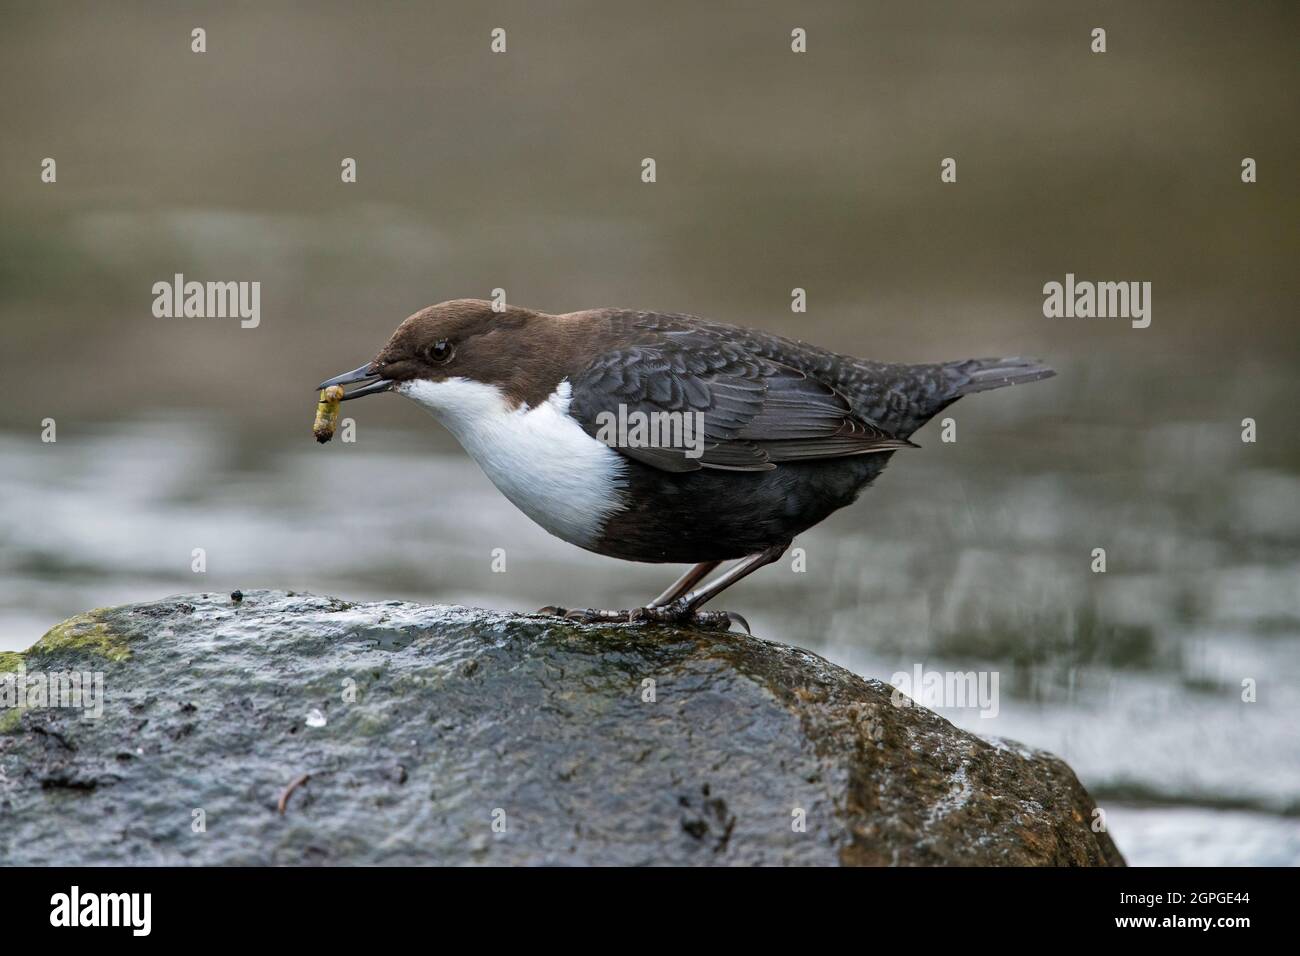 White-throated dipper / European dipper (Cinclus cinclus) perched on rock with aquatic insect prey in beak in stream in winter Stock Photo